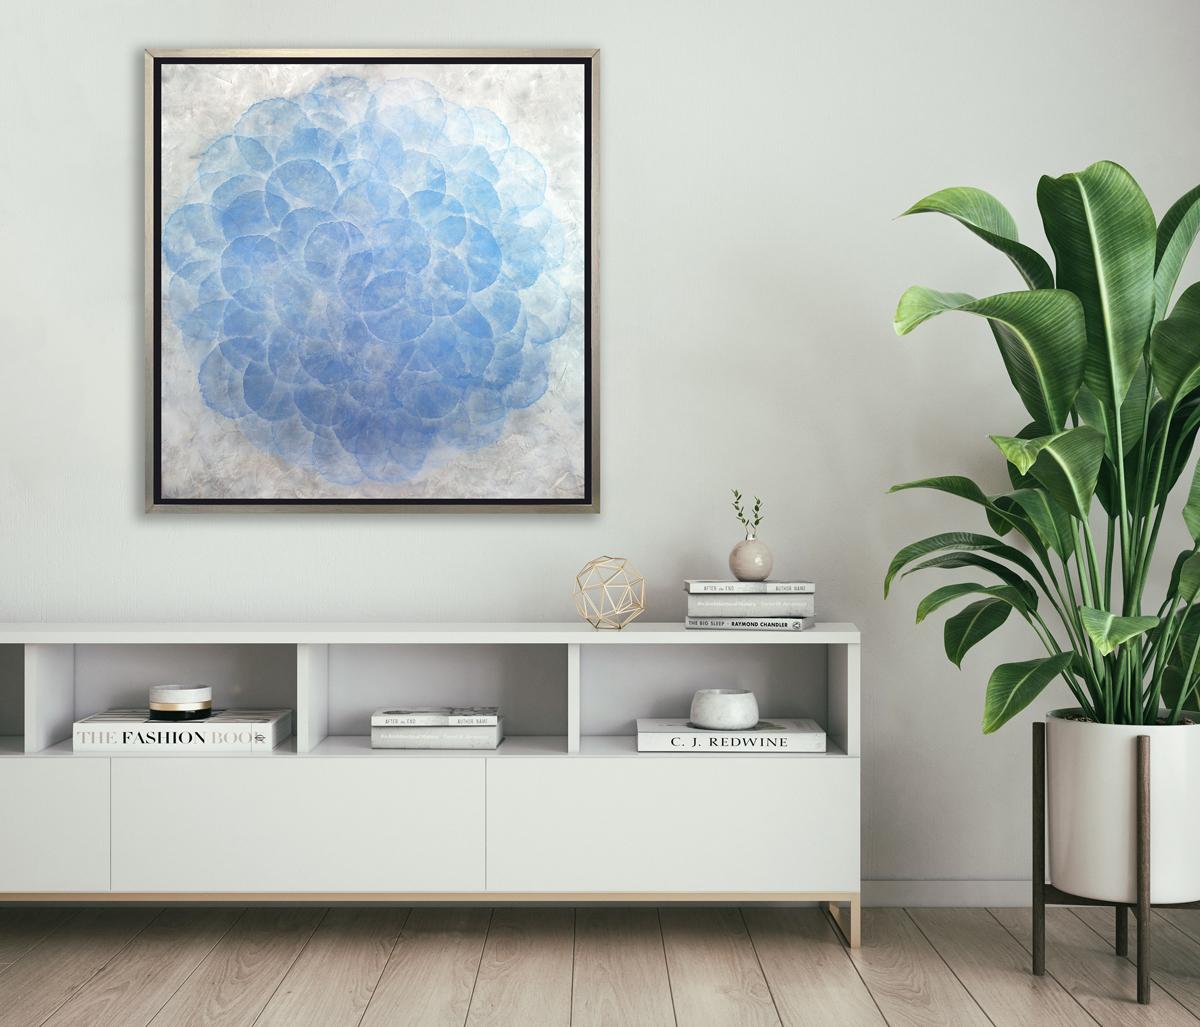 This Limited Edition giclee print by Roger Mudre features nearly transparent light blue circles, arranged in an overlapping pattern to create a larger circle shape. The outer layer of the circle blends into the surrounding silver-grey background and